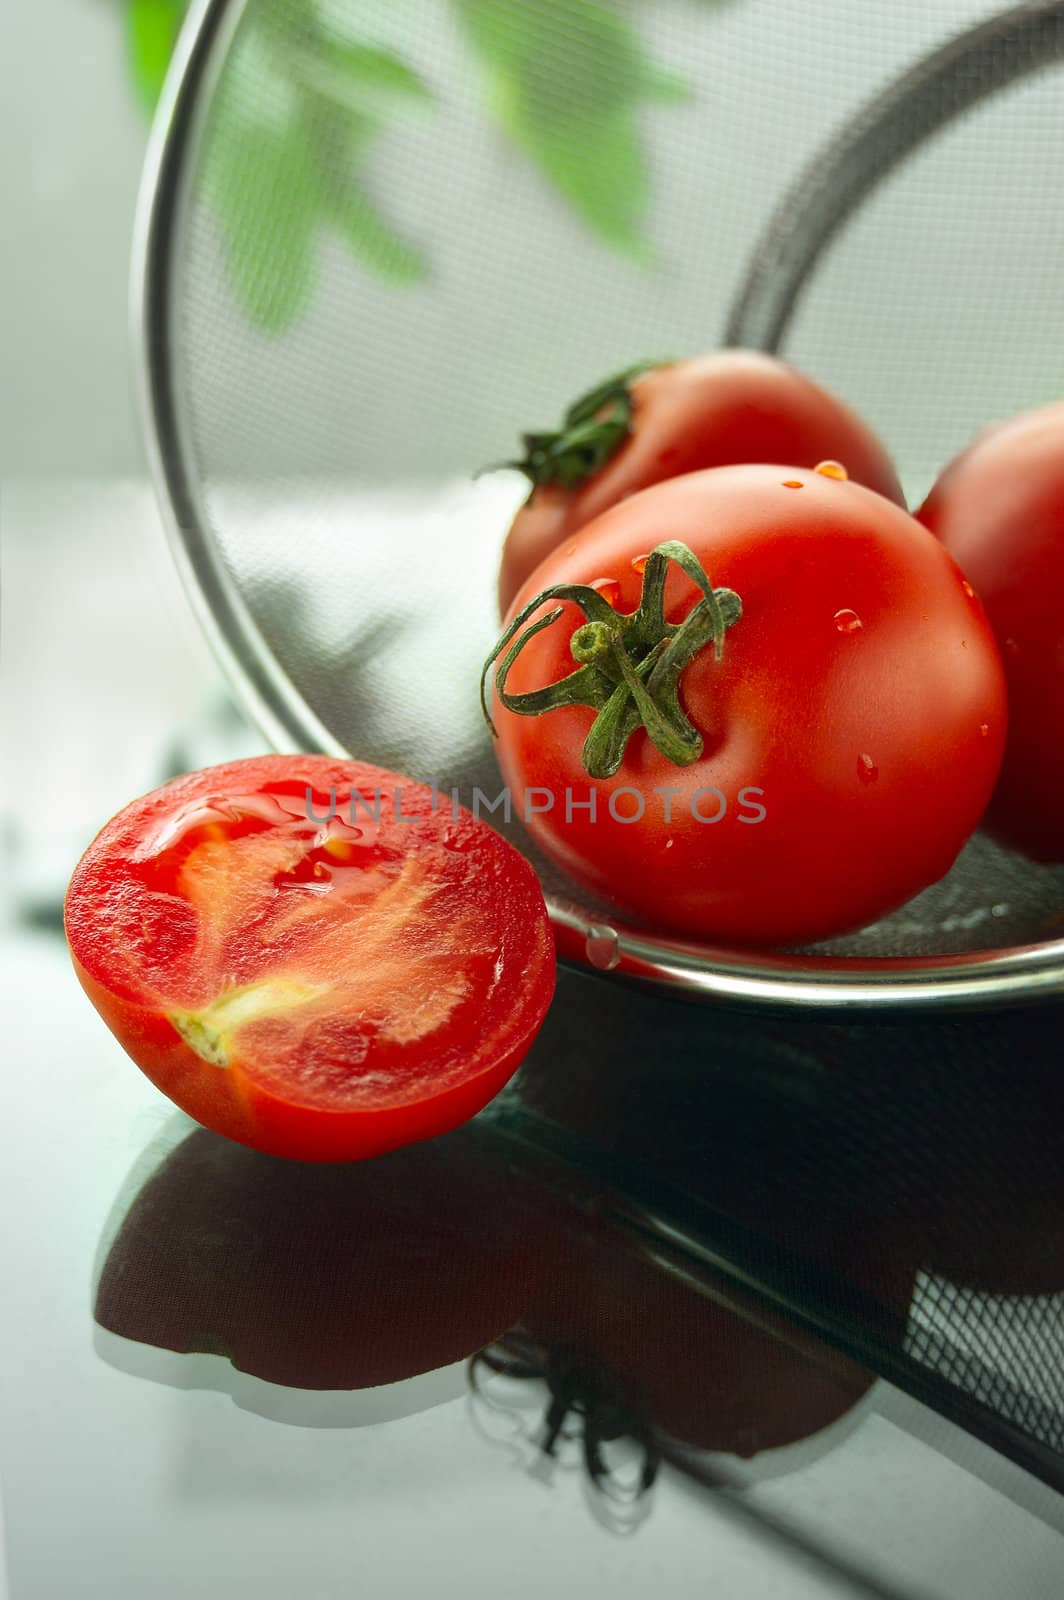 Ripe tomatoes in sieve







Ripe Tomatoes  in